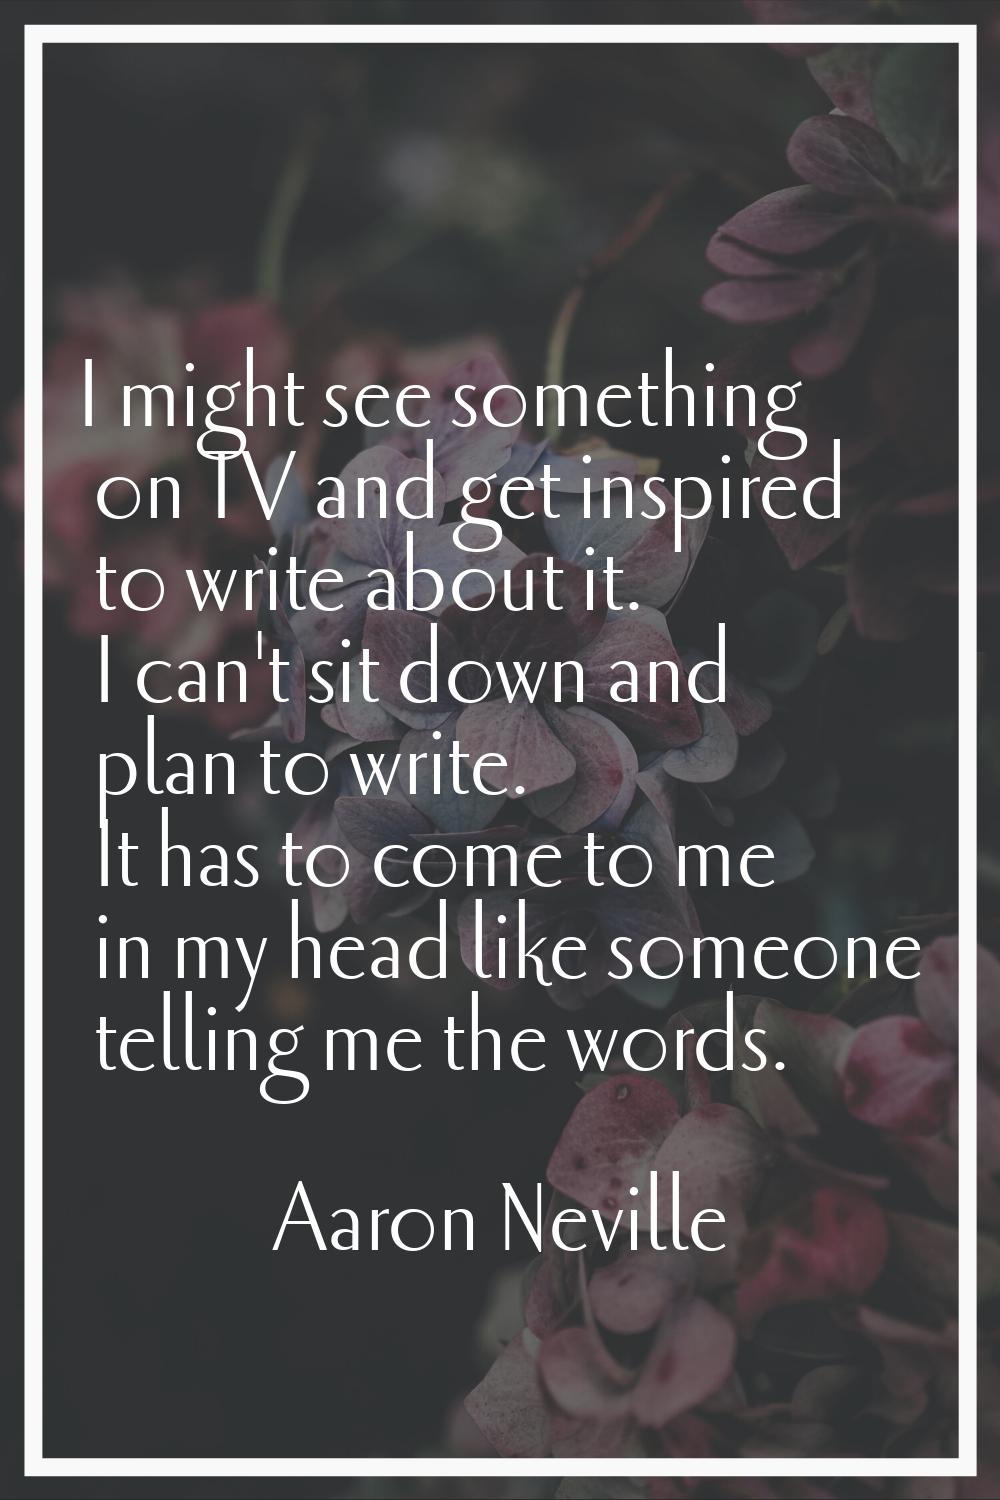 I might see something on TV and get inspired to write about it. I can't sit down and plan to write.